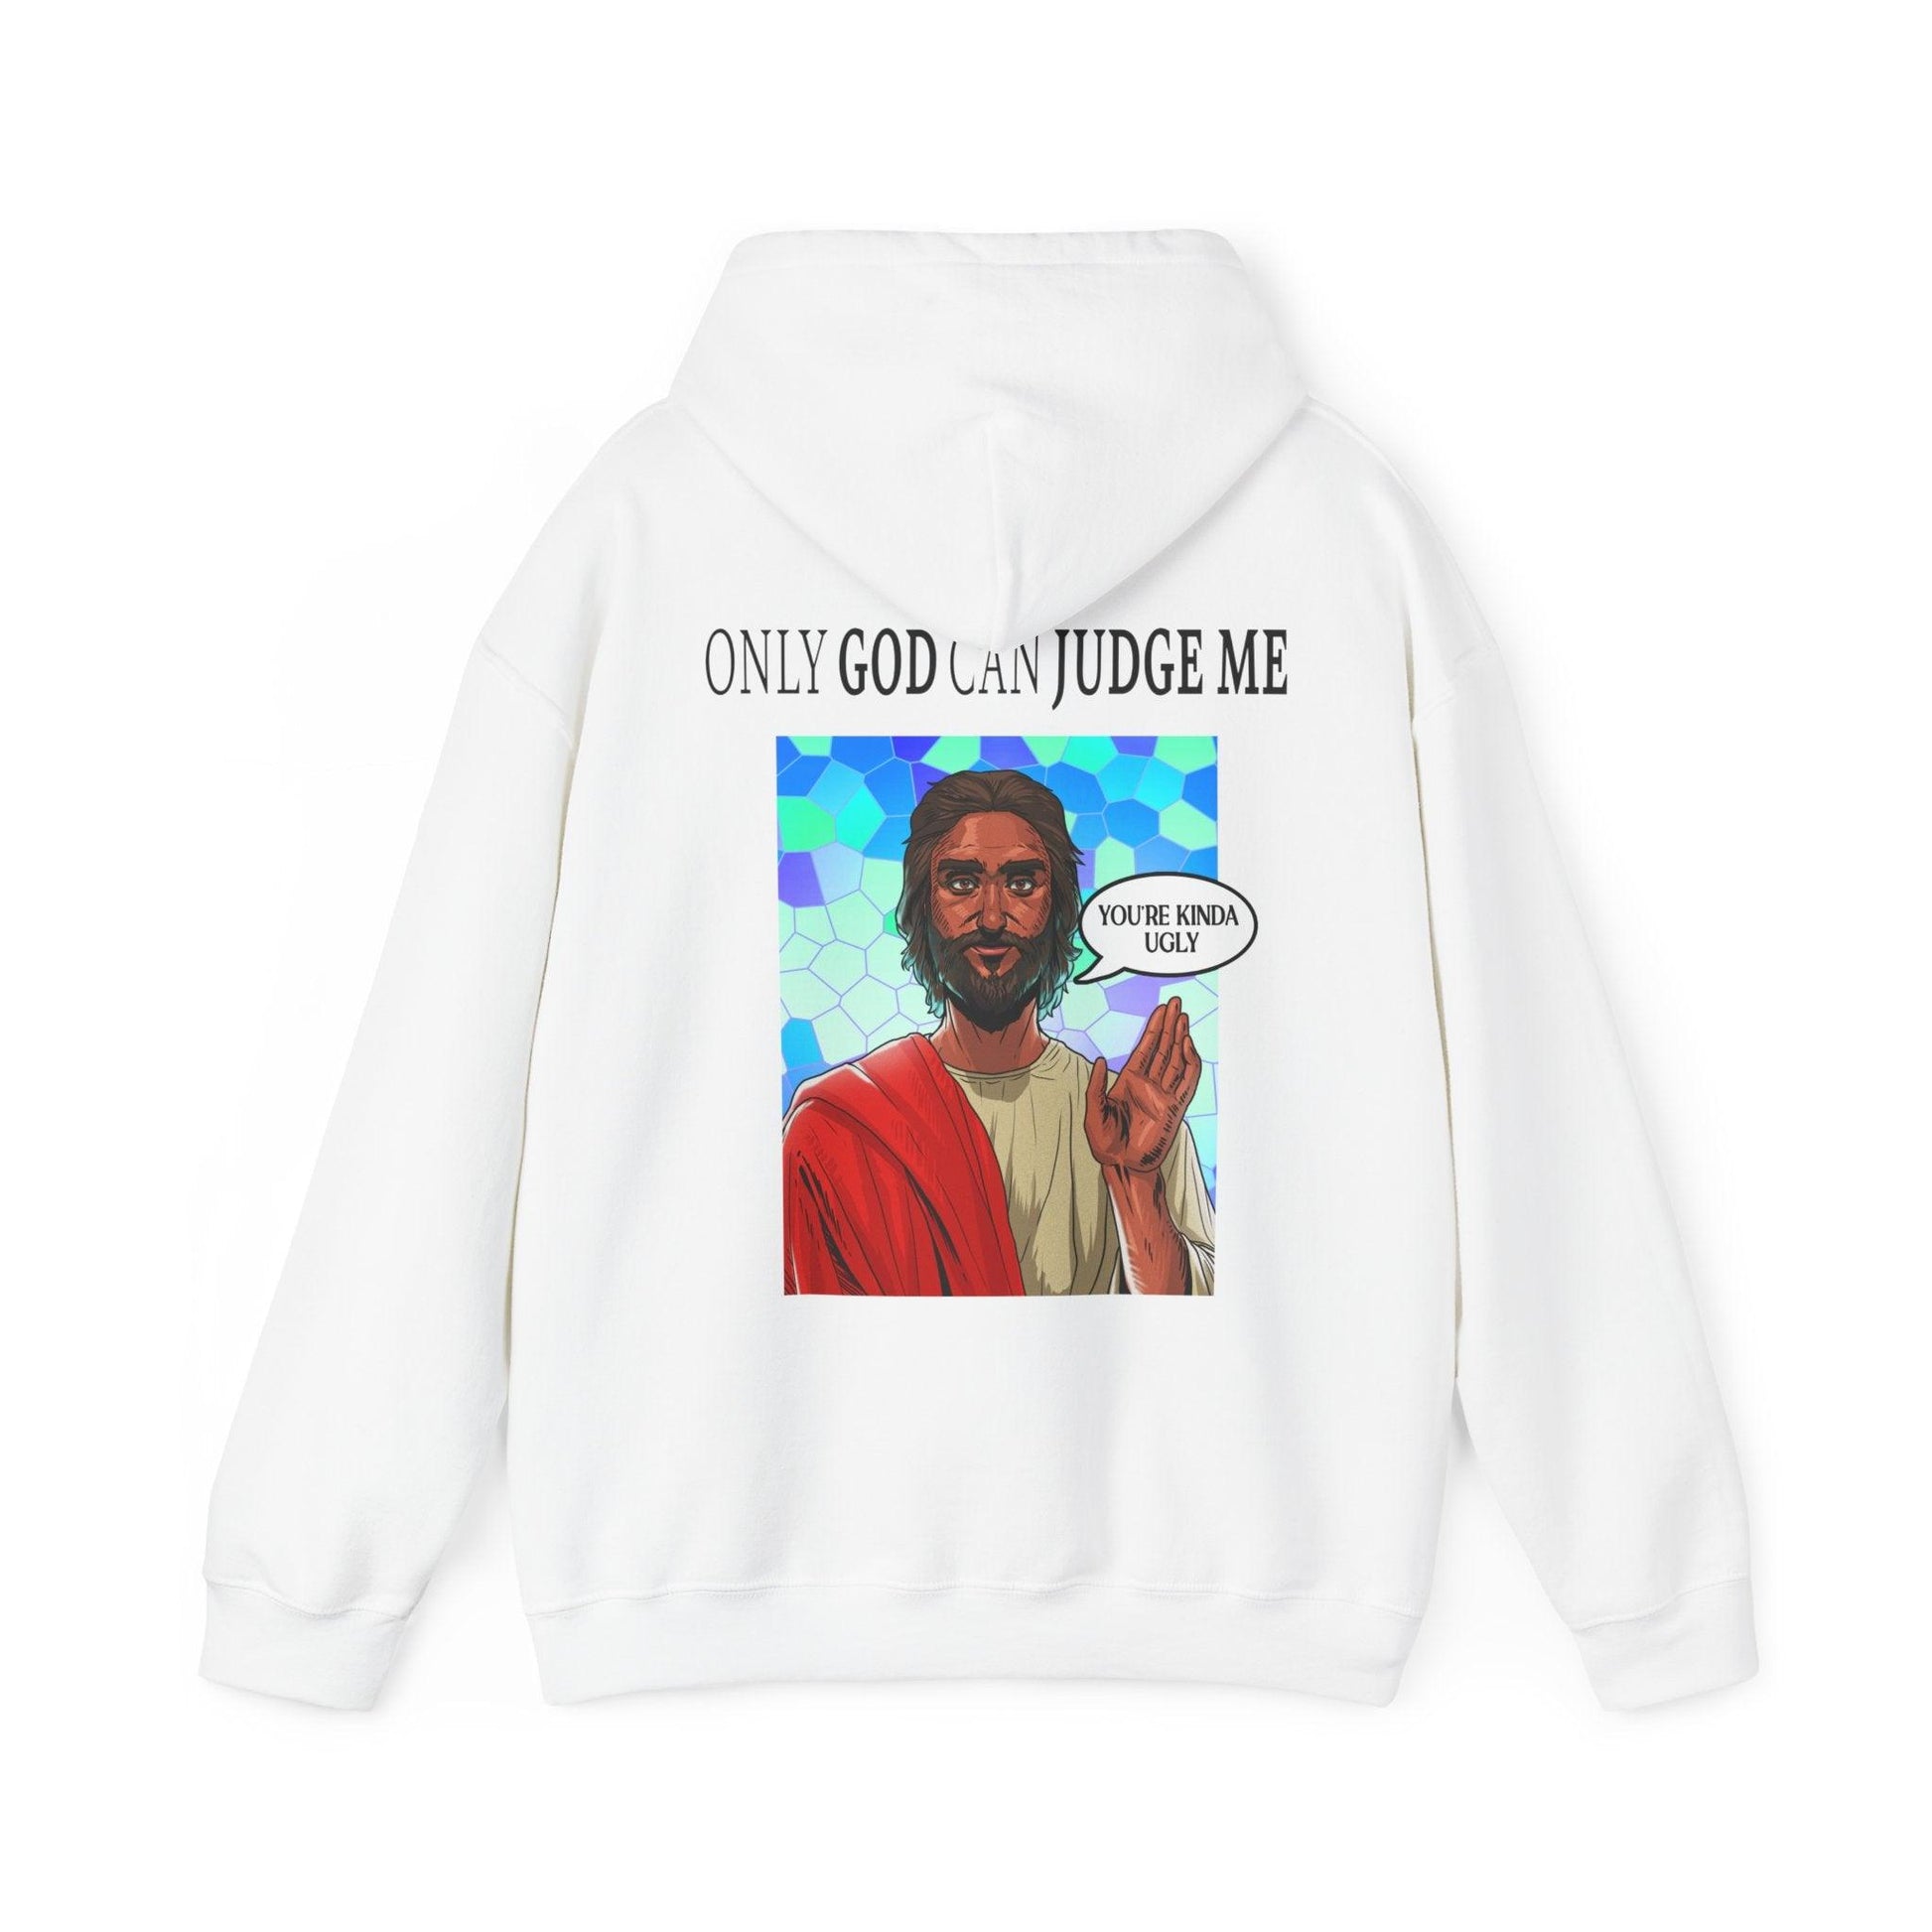 Only God Can Judge Me - Unisex Heavy Blend Hooded Sweatshirt - Shaneinvasion